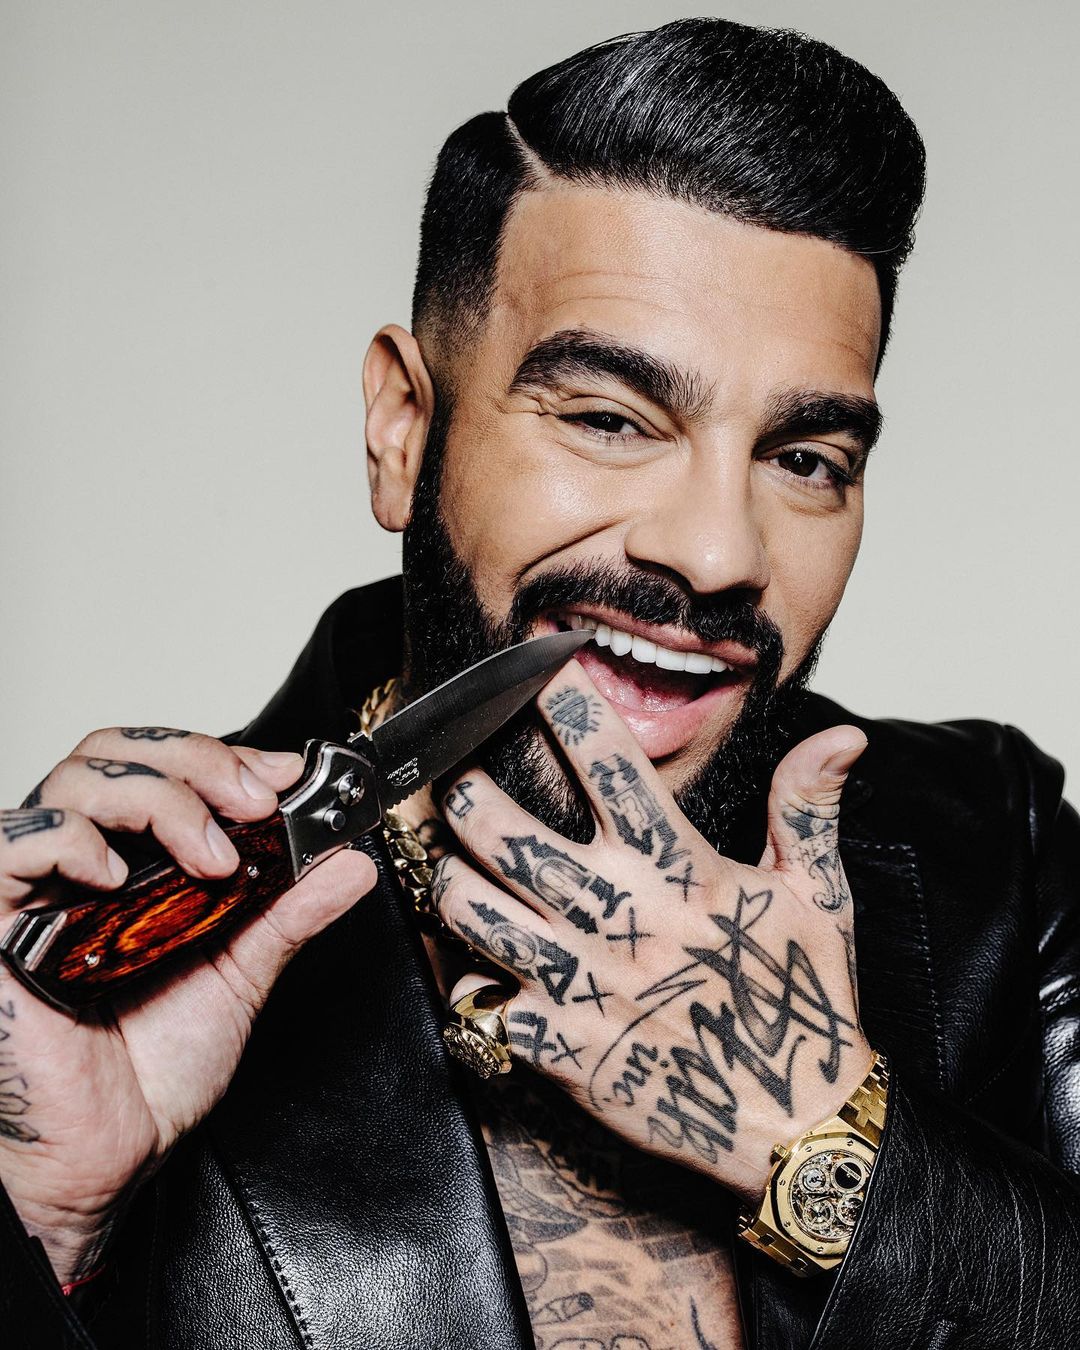 Timati invested $ 1 million in a new business